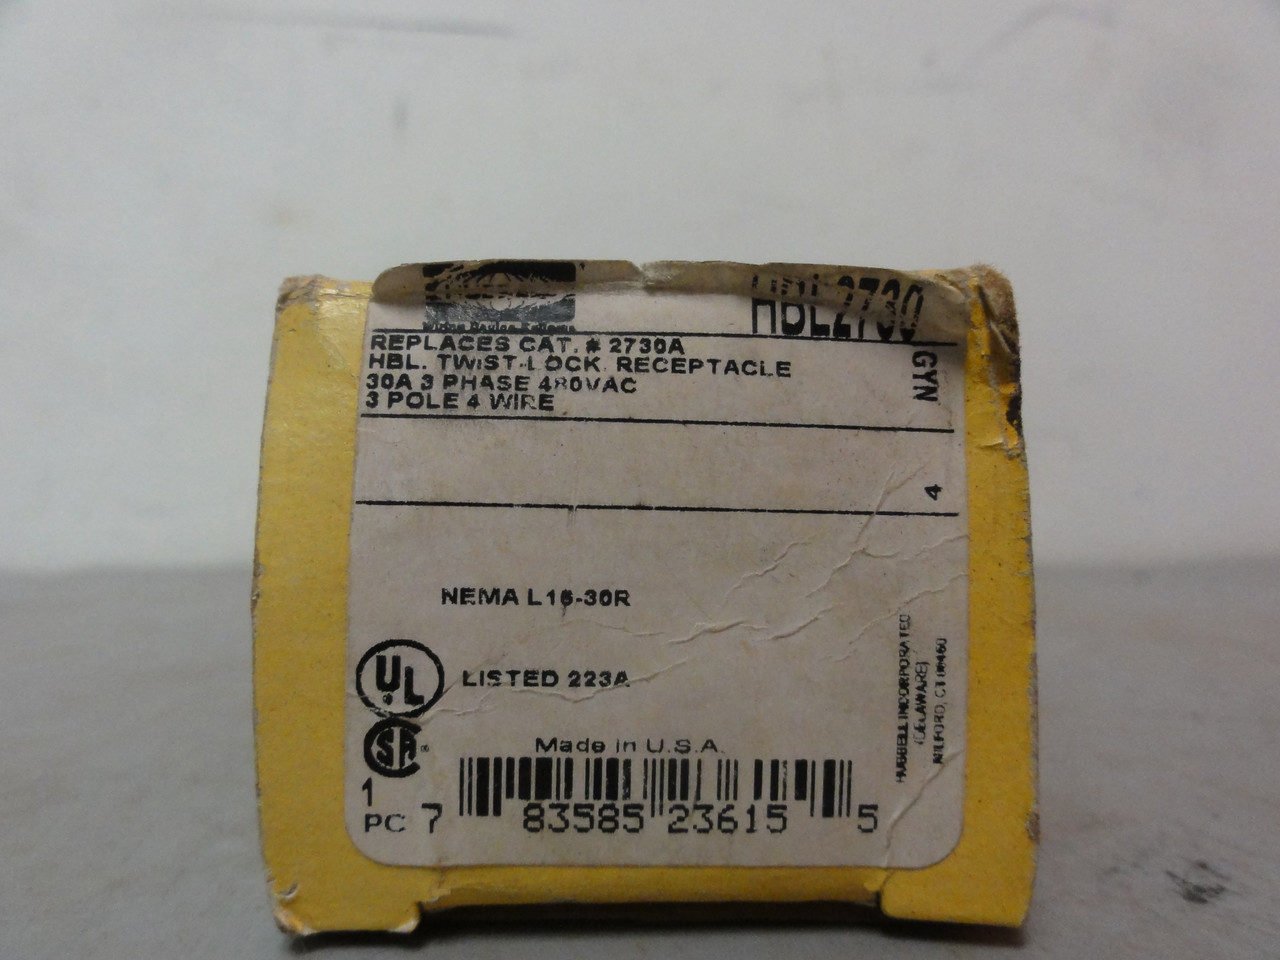 Hubbell HBL 2730 Twist Lock Receptacle 3 Pole 4 Wire 30A 40V- New (Open Box)